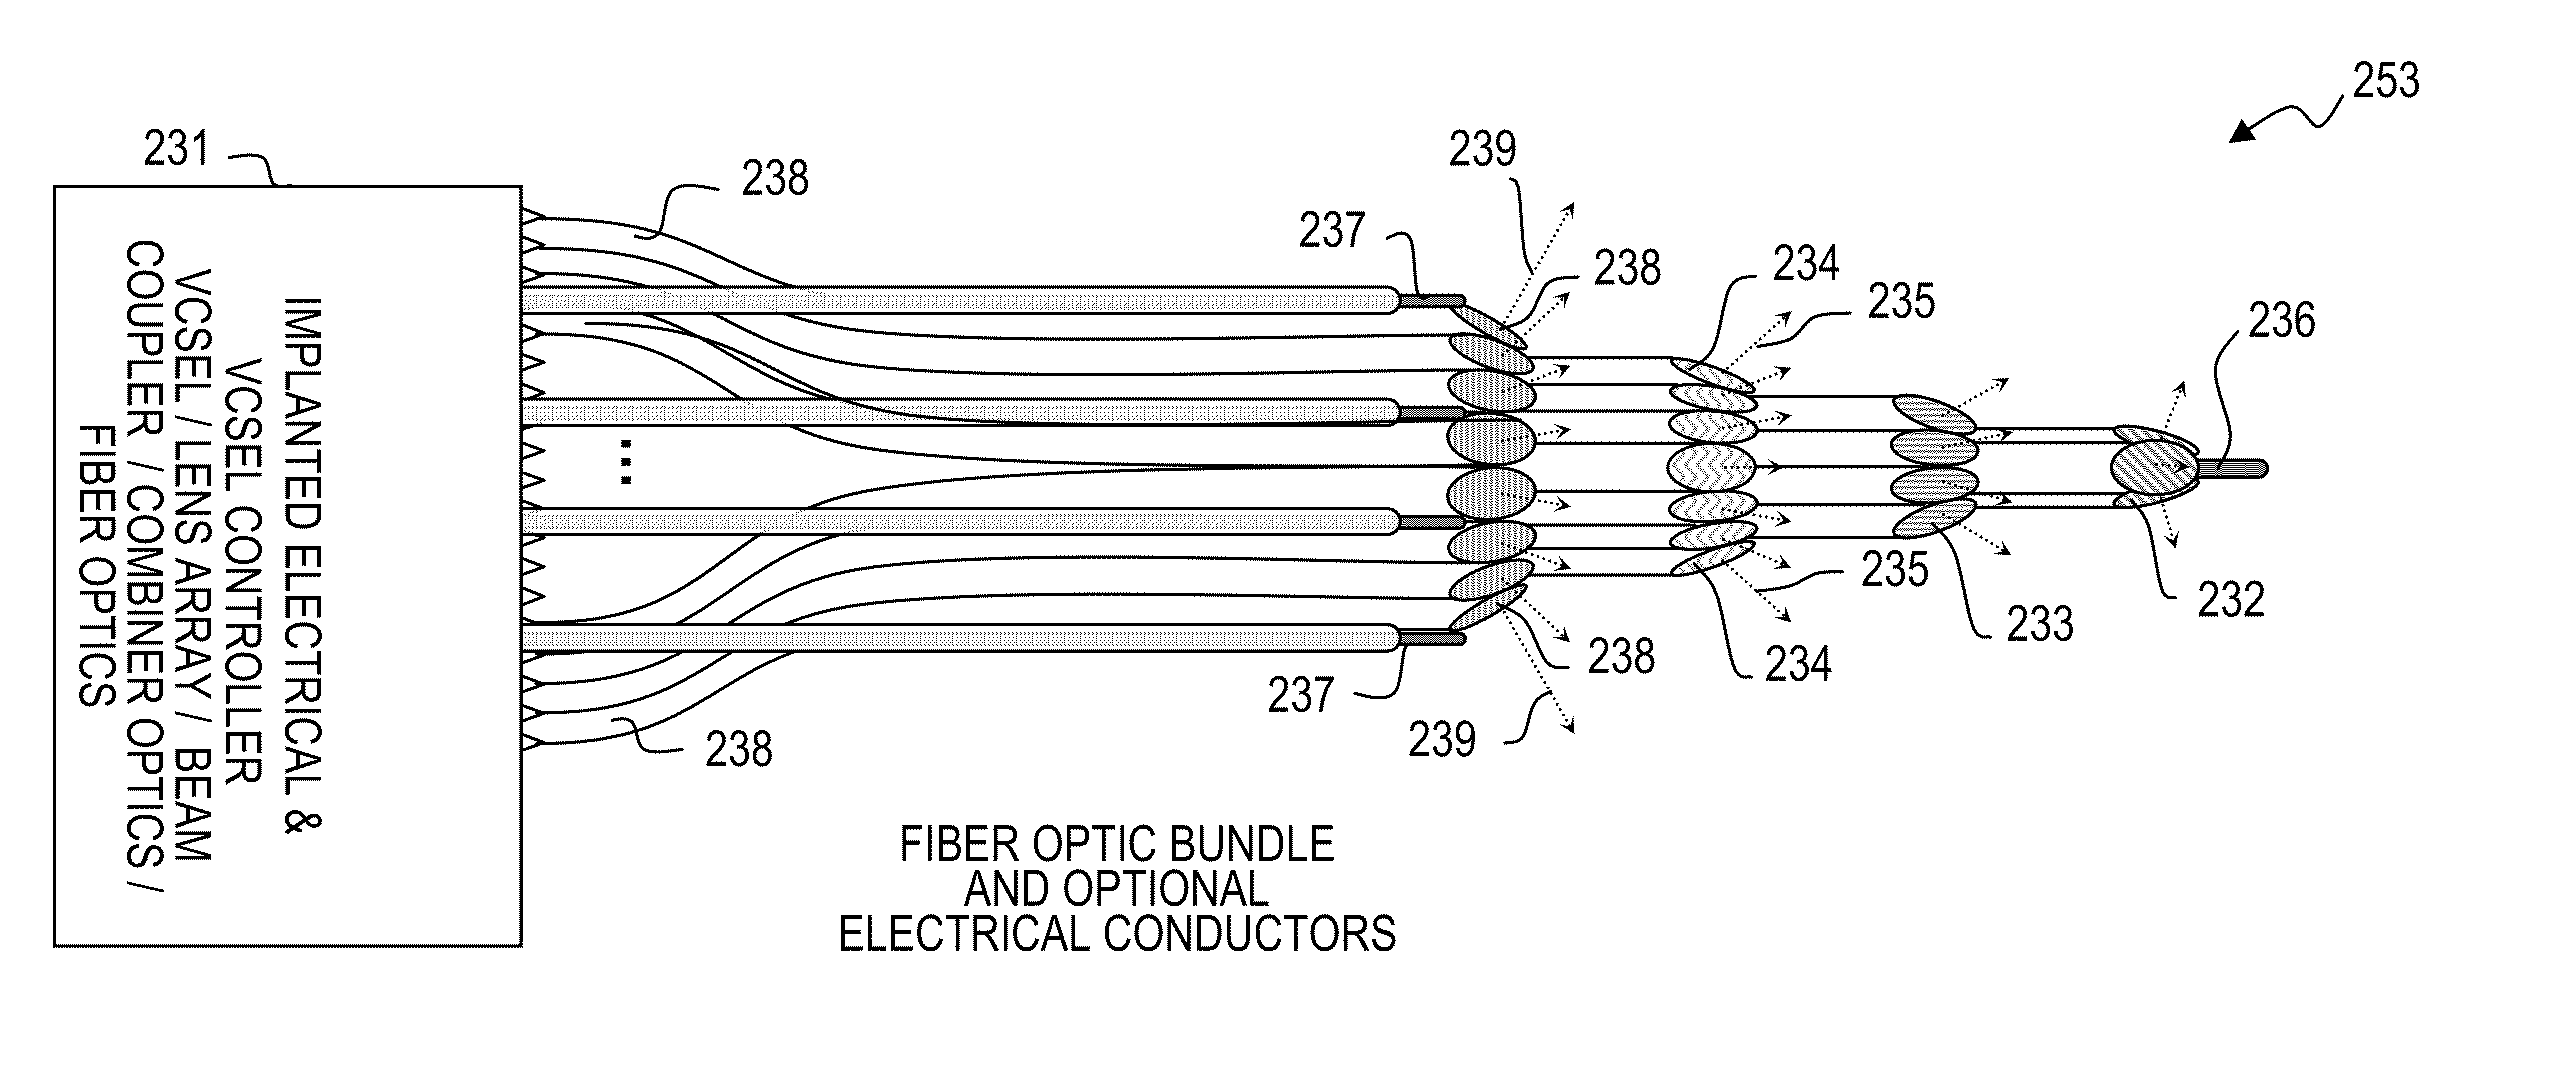 Optical bundle apparatus and method for optical and/or electrical nerve stimulation of peripheral nerves